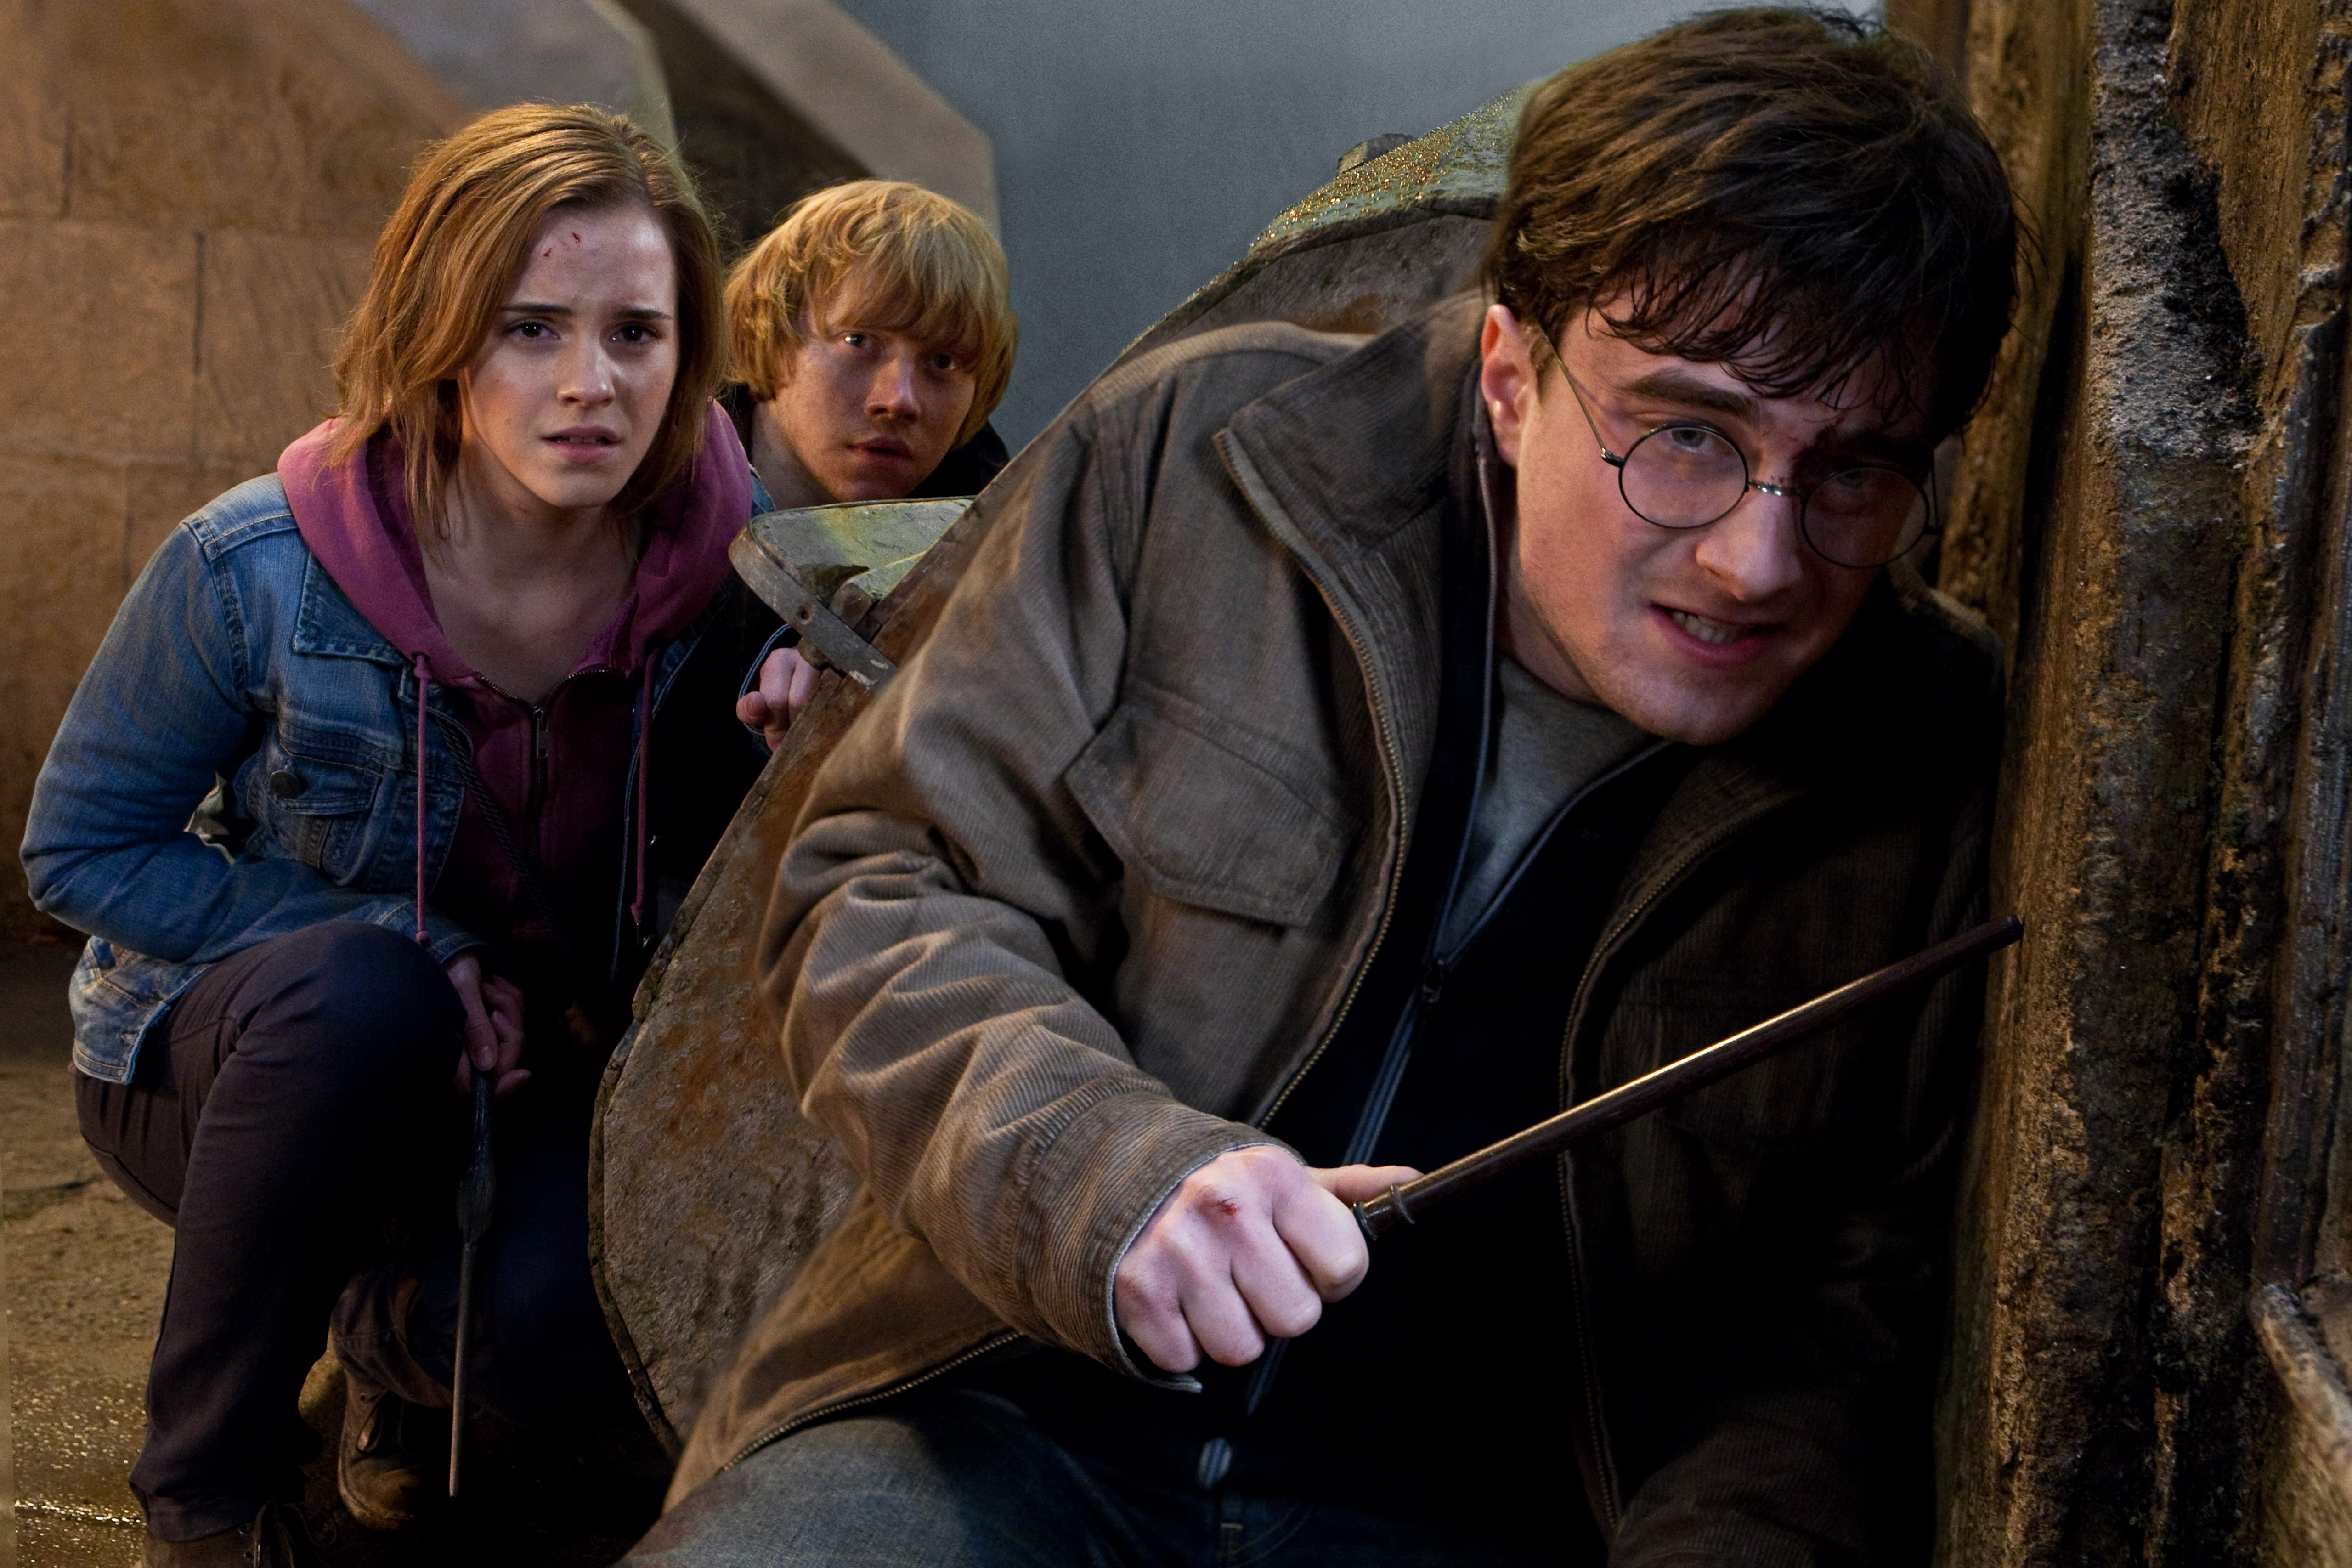 Daniel Radcliffe, right, as Harry Potter, Rupert Grint as Ron Weasley, and Emma Watson as Hermione Granger in 'Harry Potter and the Deathly Hallows —Part 2' (2011).